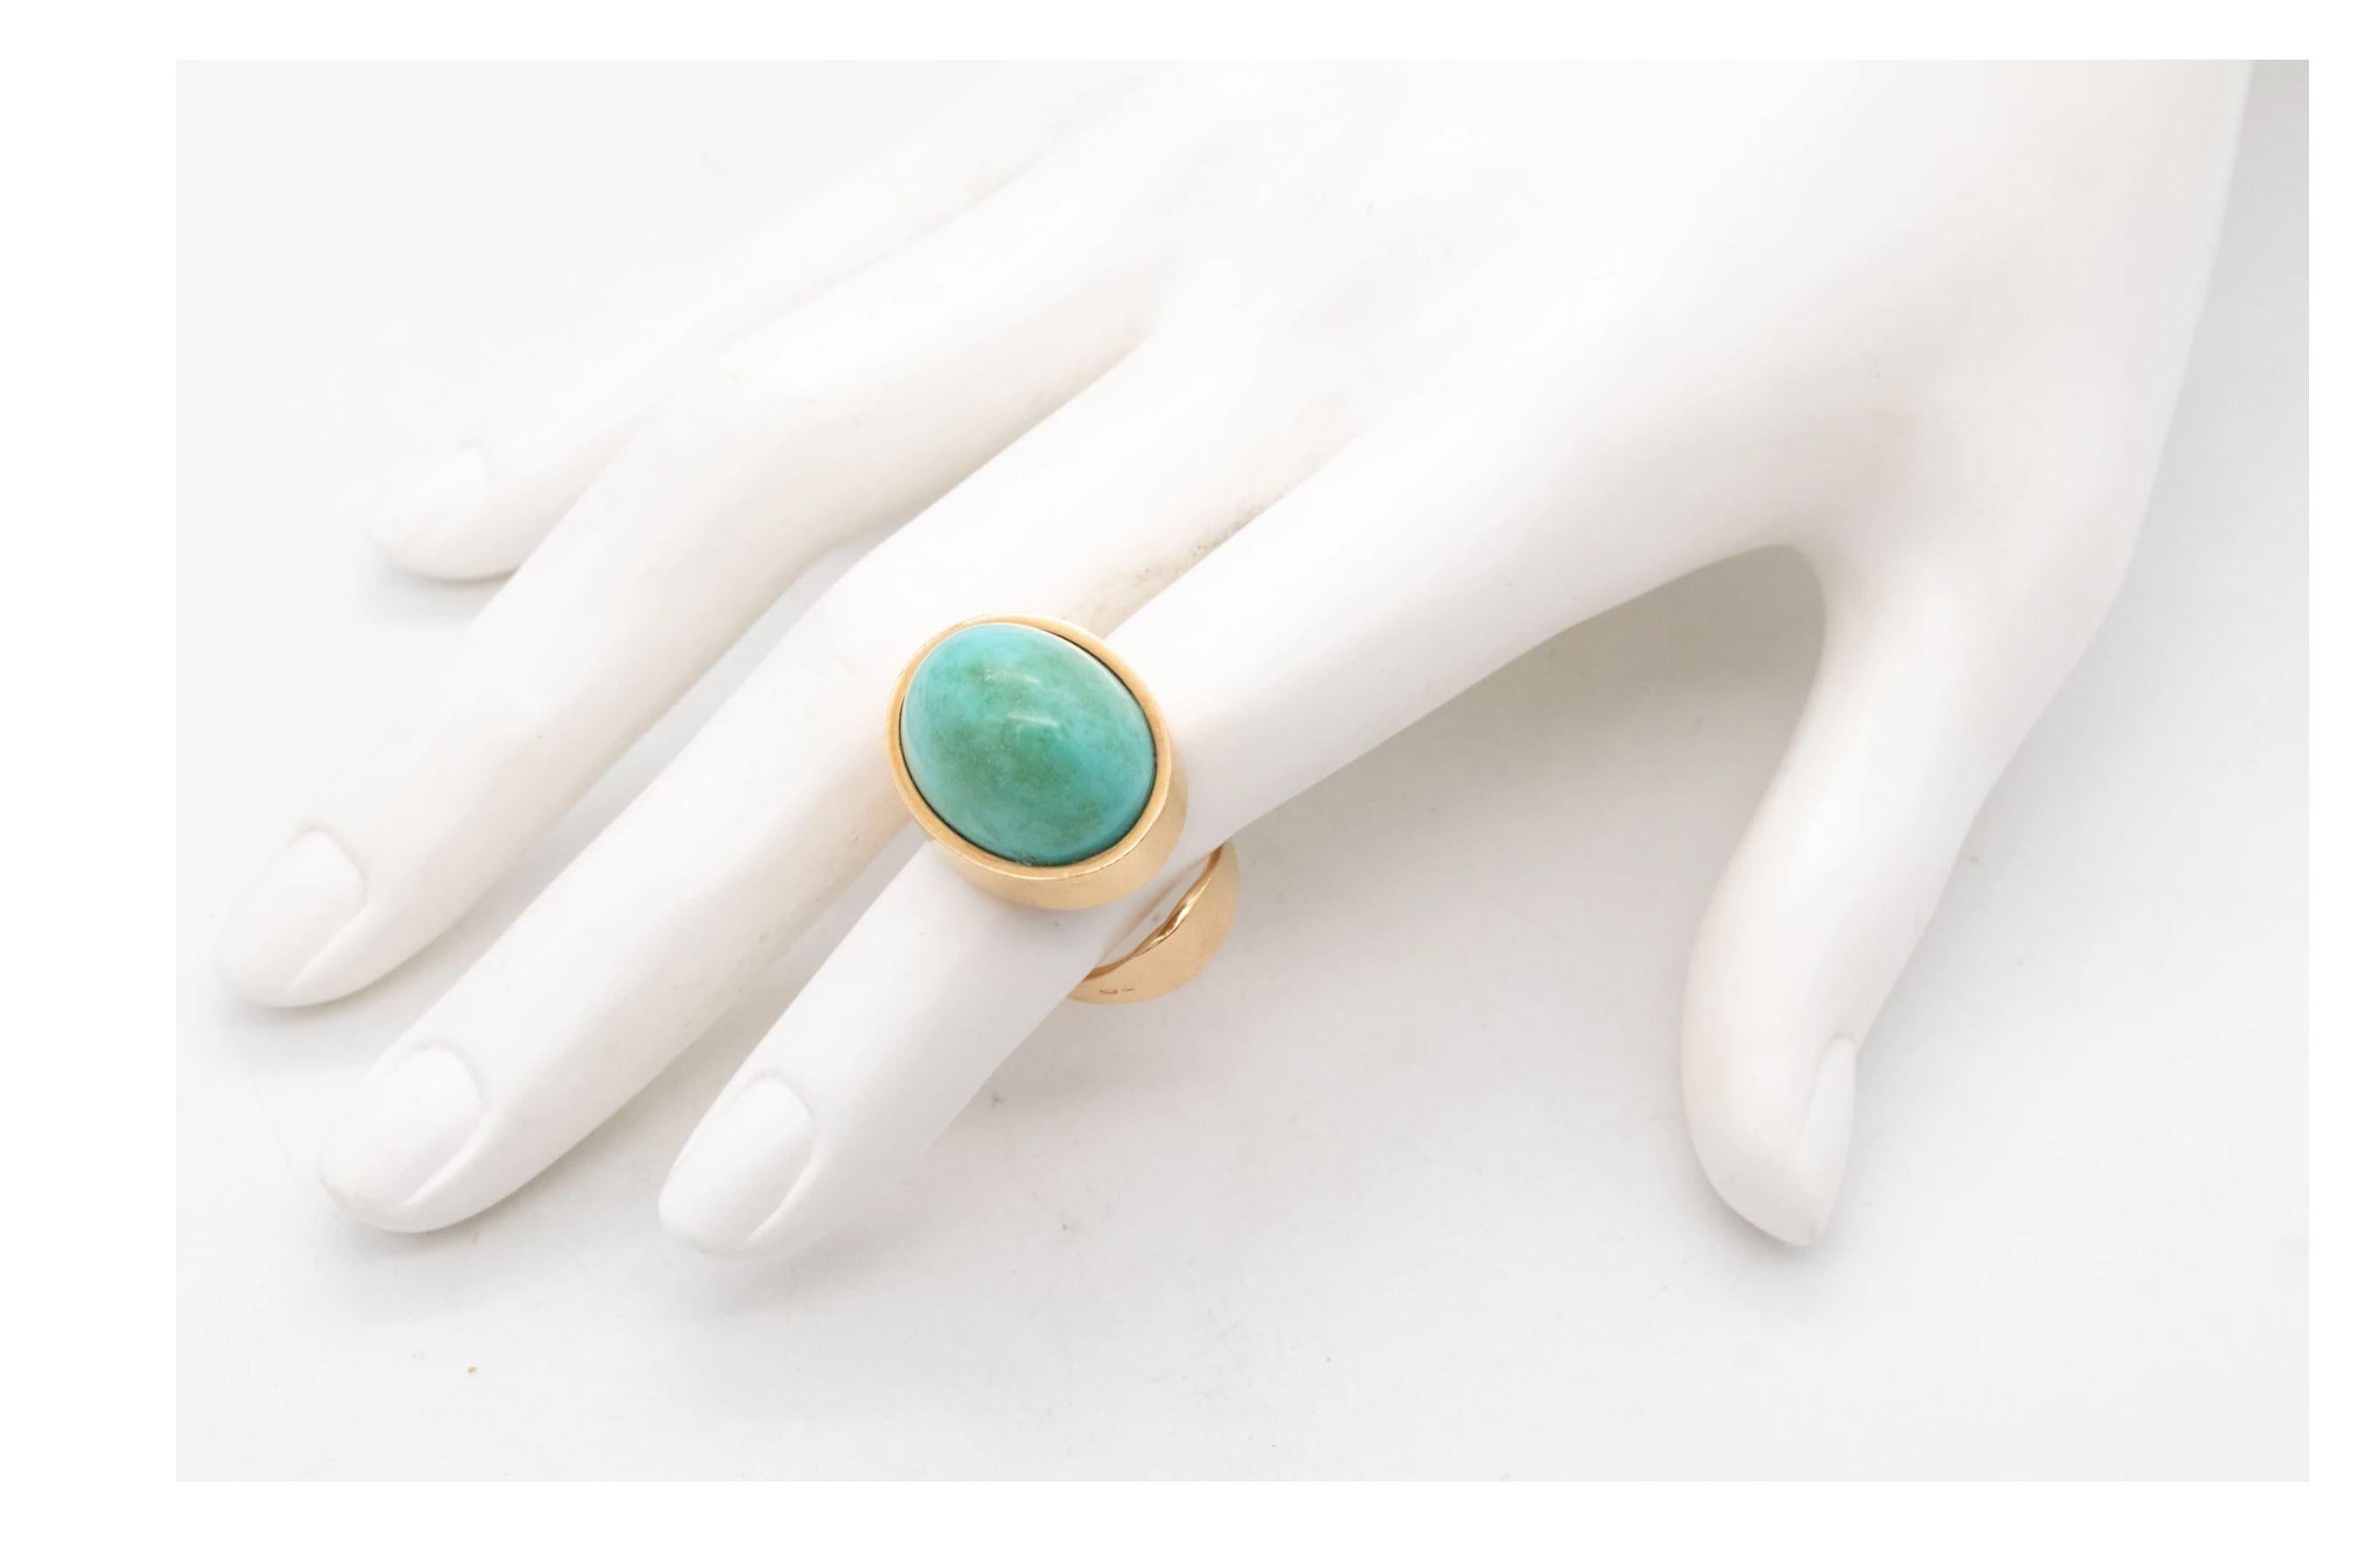 Dinh Van Paris For Pierre Cardin 1970 Geometric Ring 18Kt Yellow Gold Turquoise 1